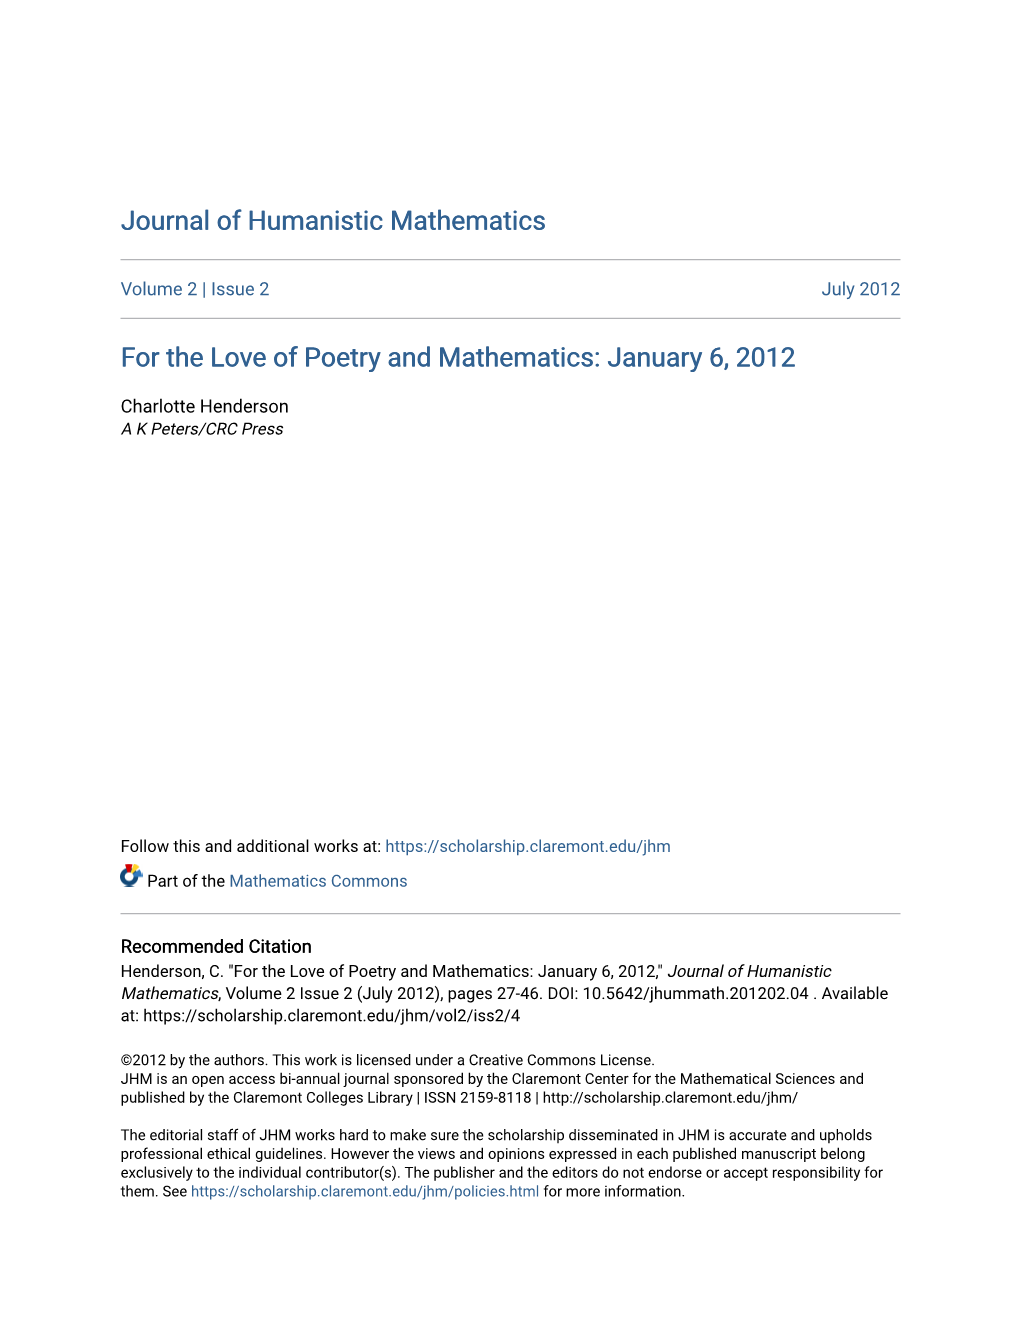 For the Love of Poetry and Mathematics: January 6, 2012